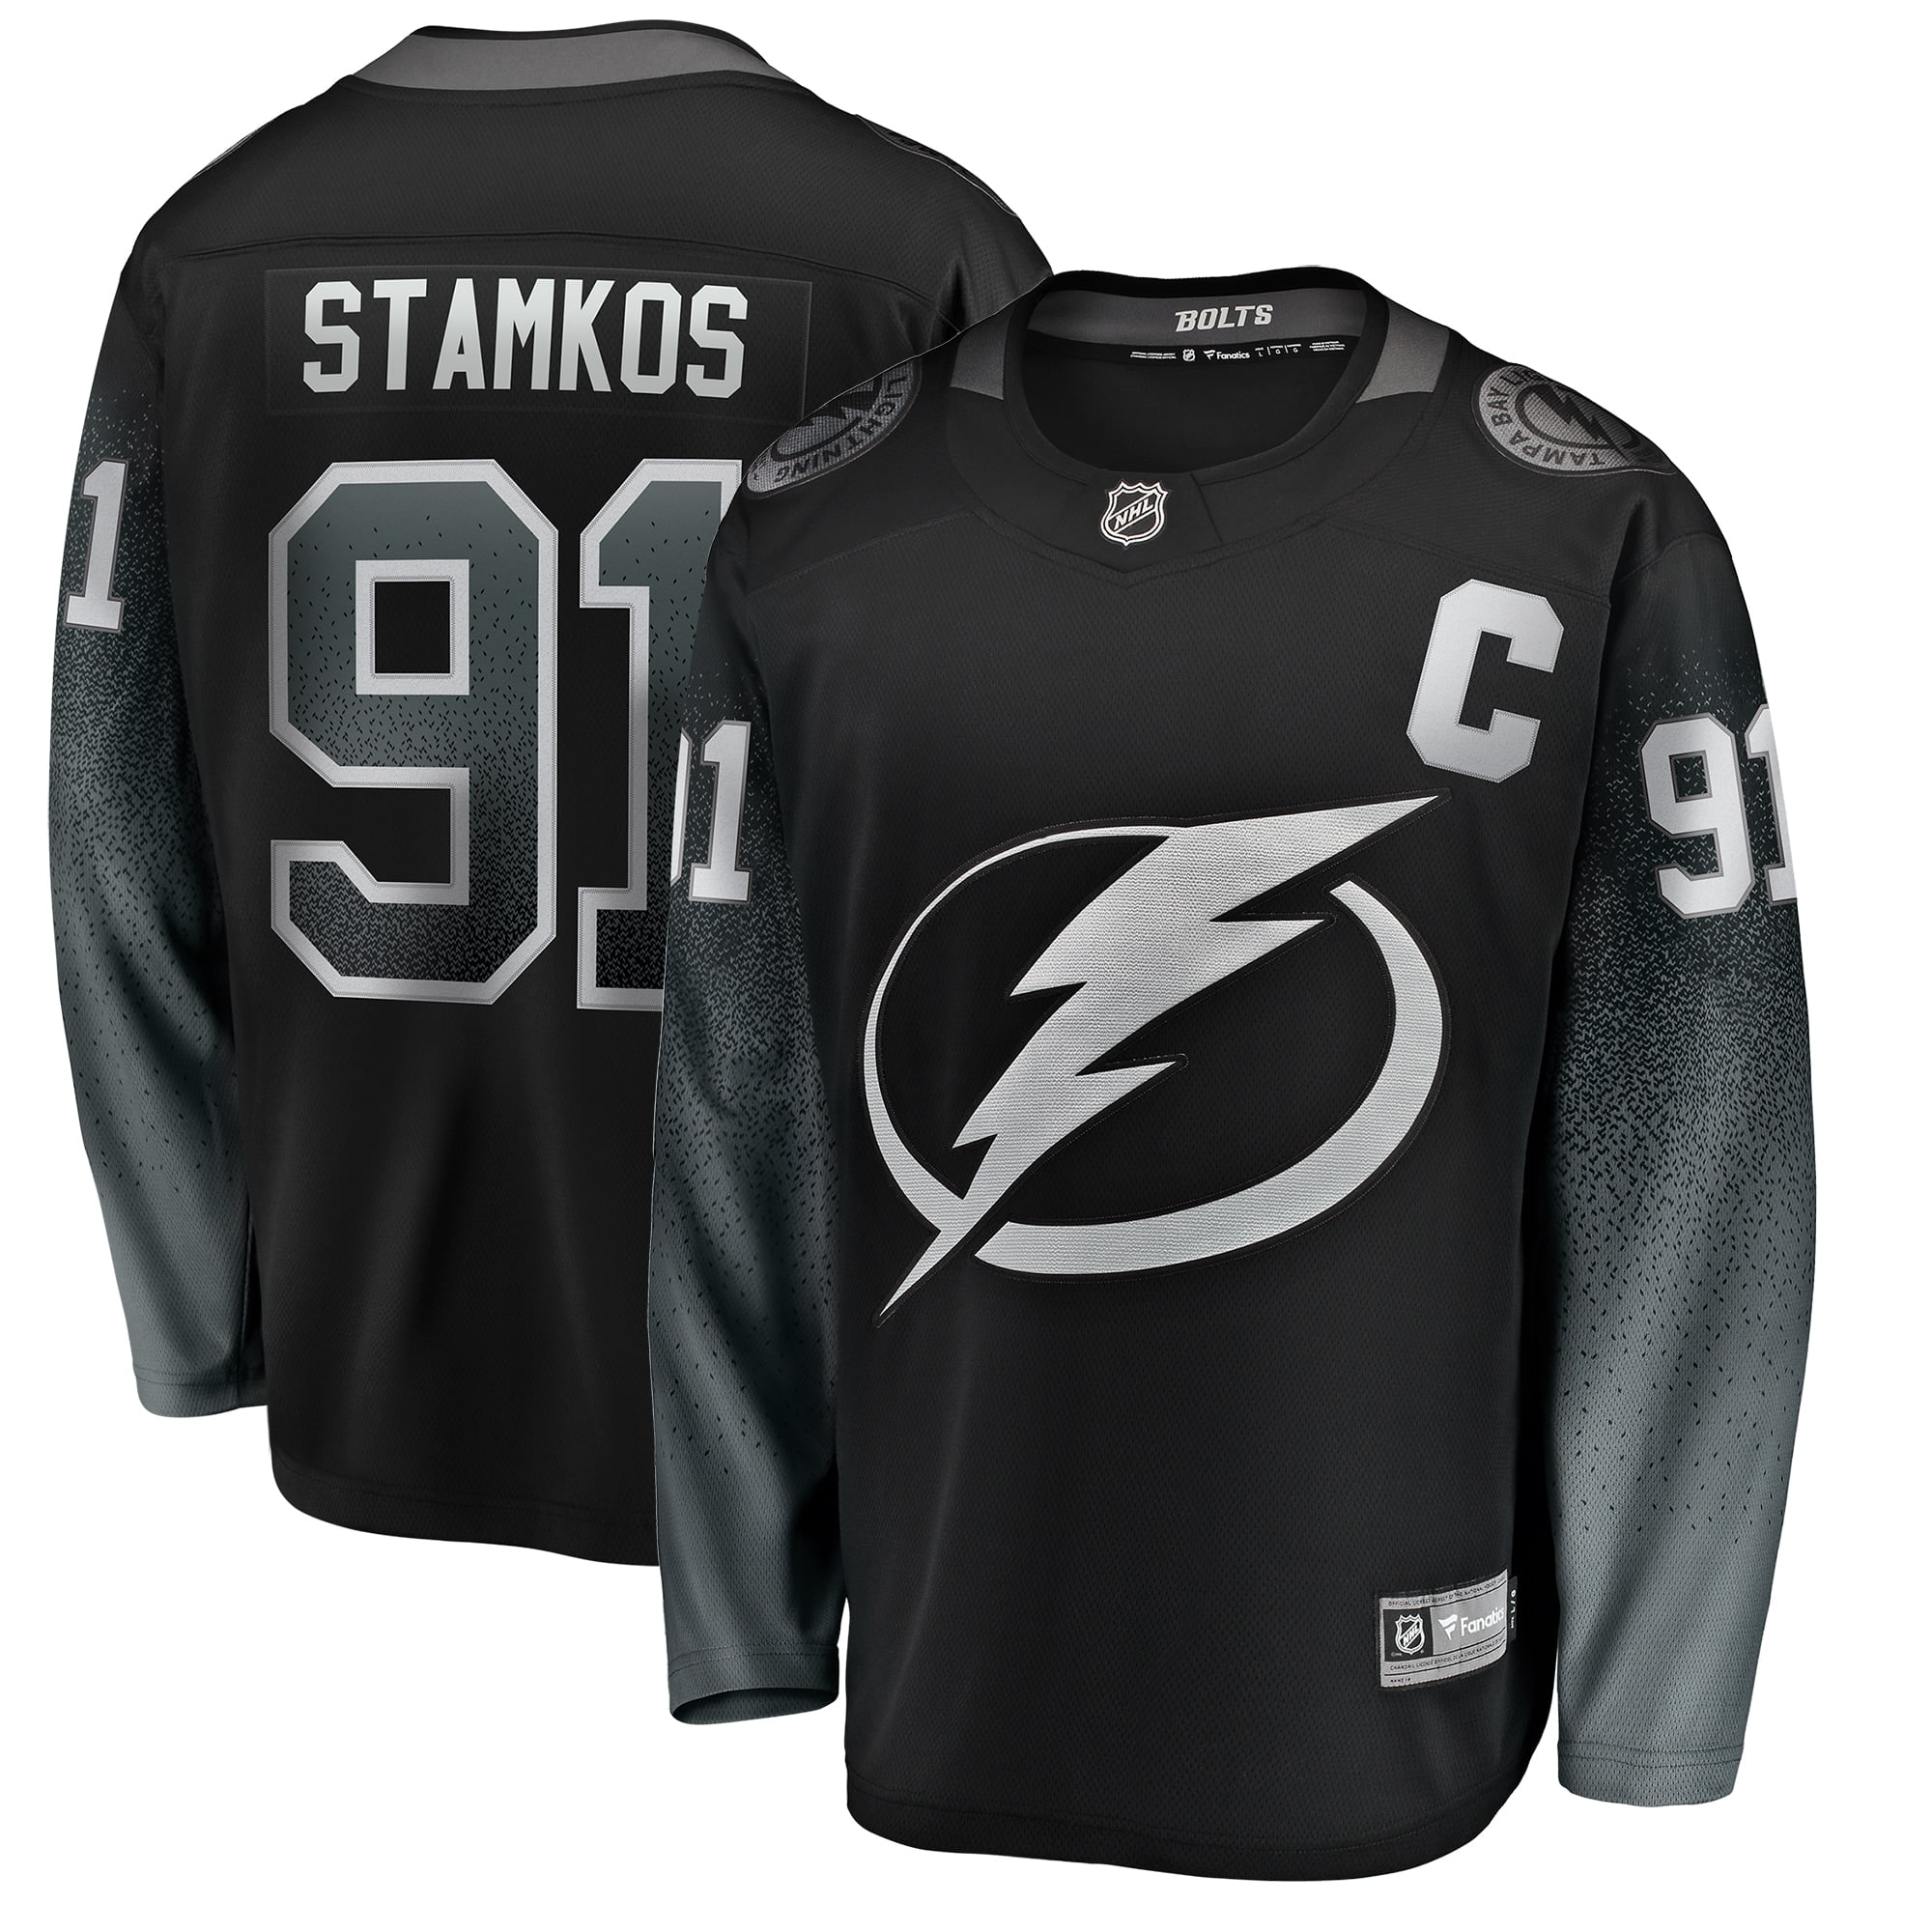 tampa bolts jersey